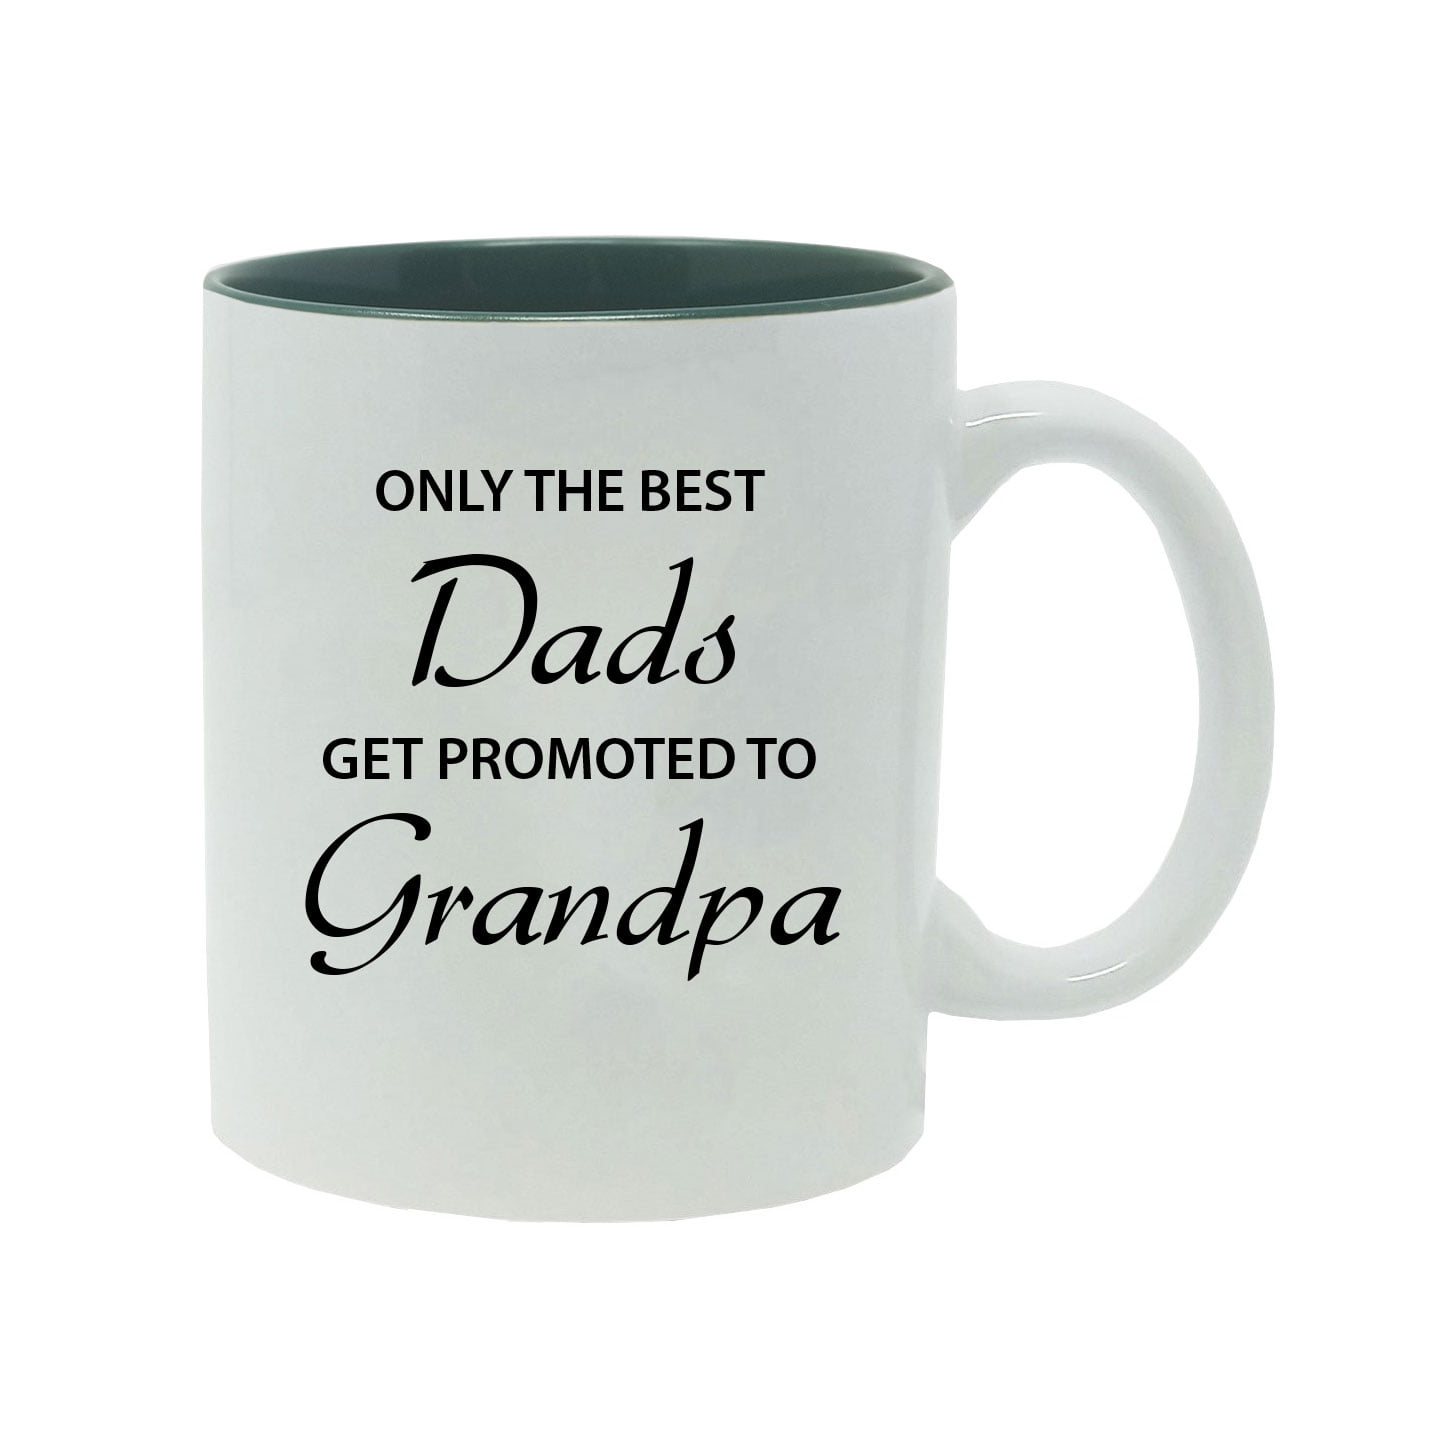 14oz Aluminium Travel Mug Only The Best Dads Get Promoted To Grandad 